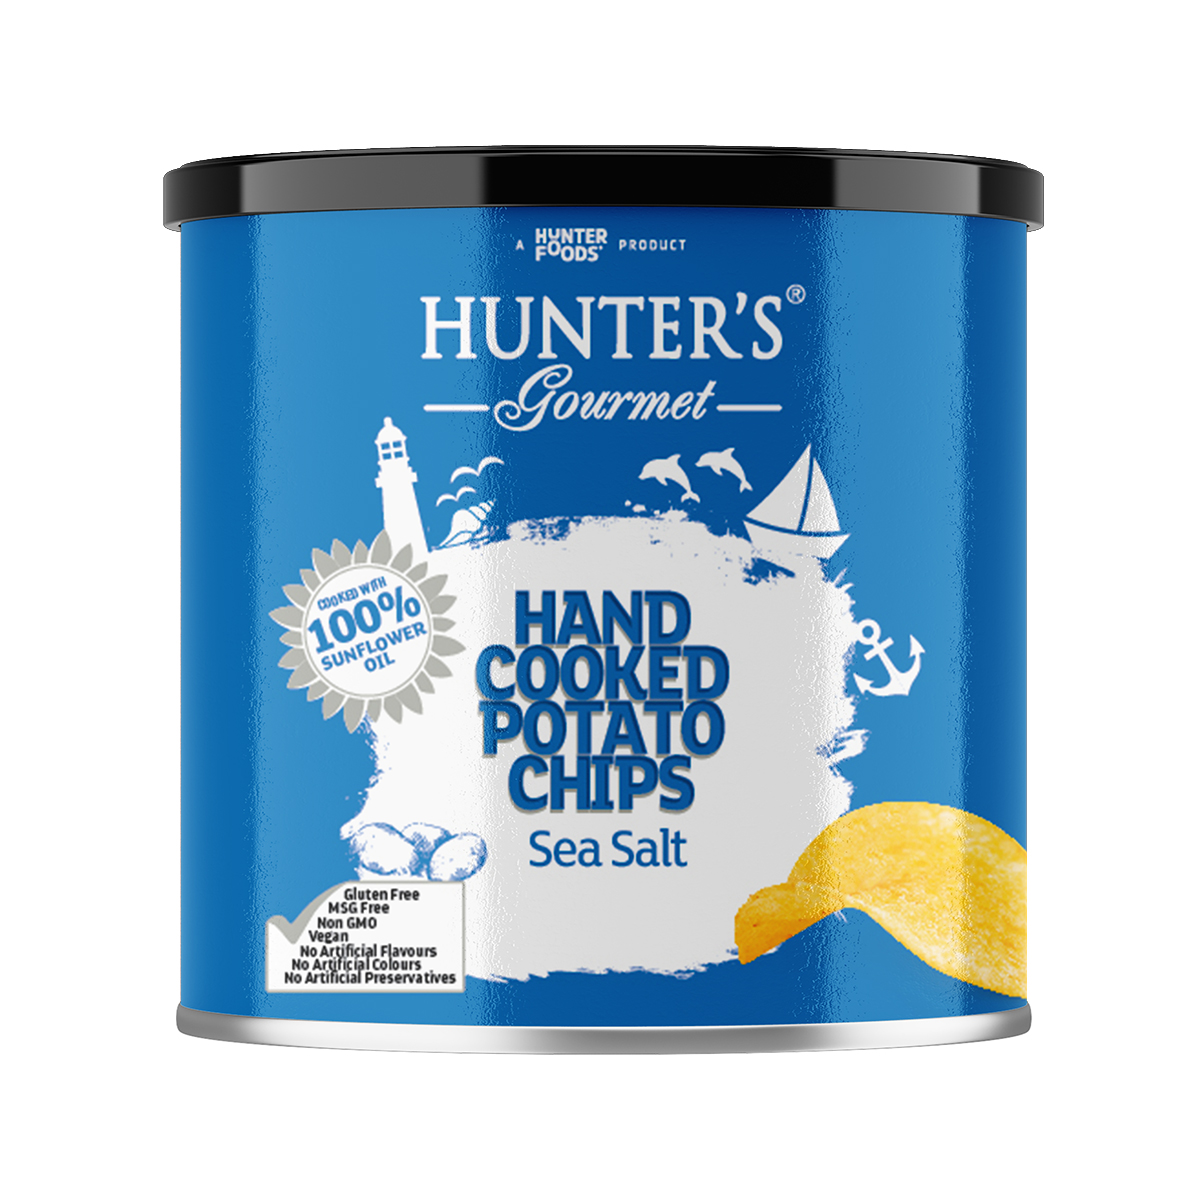 Hunter’s Gourmet Hand Cooked Potato Chips – Sea Salt & Crushed Black Pepper (40gm can)